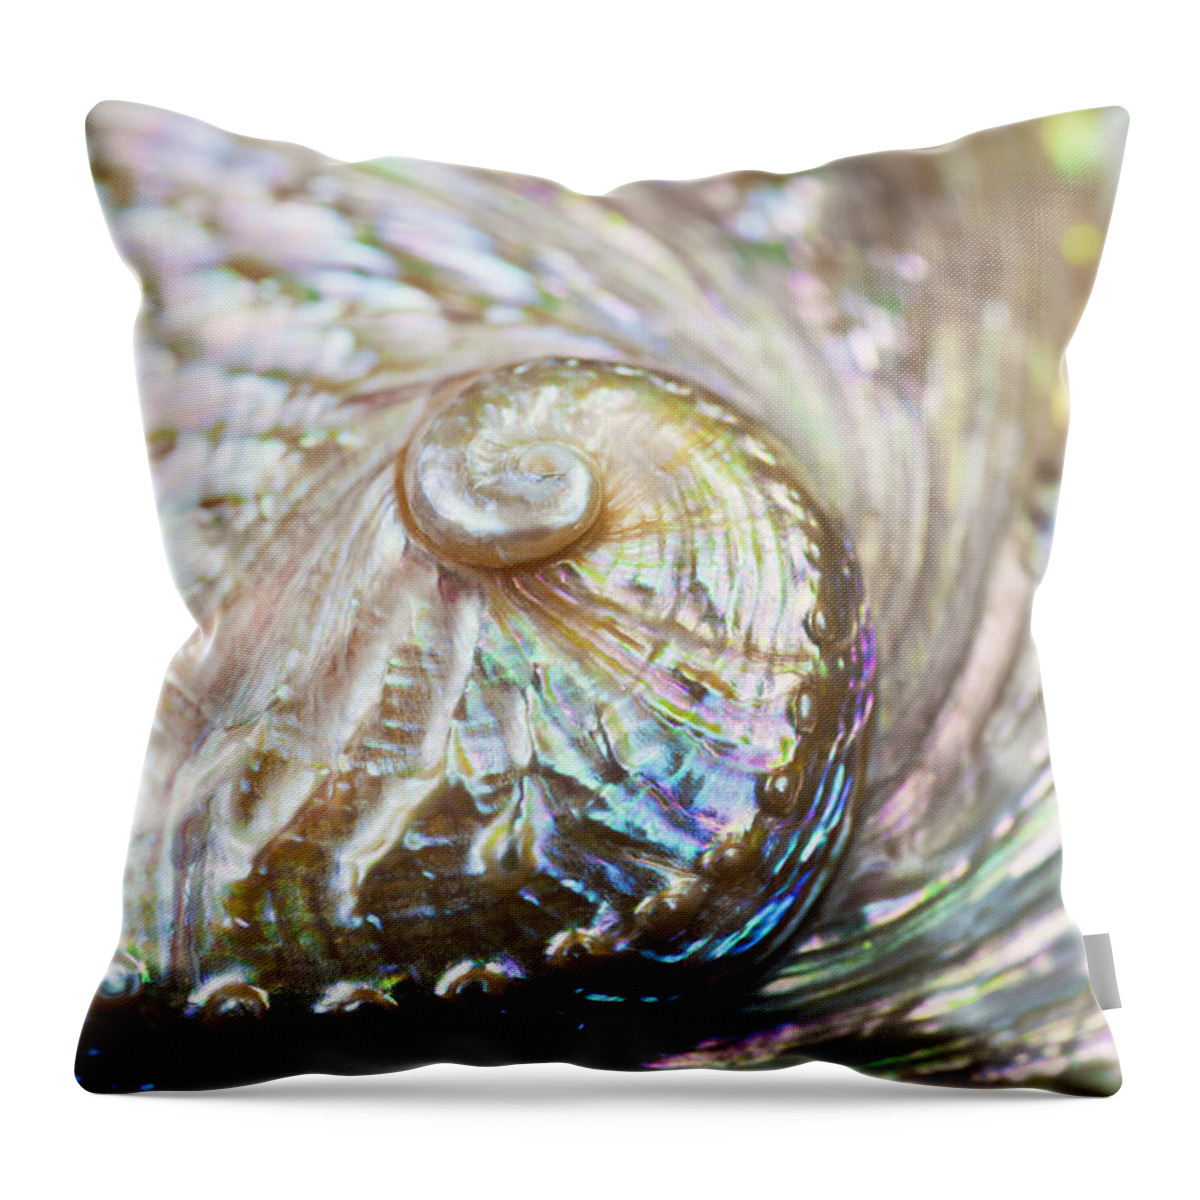 Abalone Throw Pillow featuring the photograph Abalone Shell Close-up by Bill Brennan - Printscapes